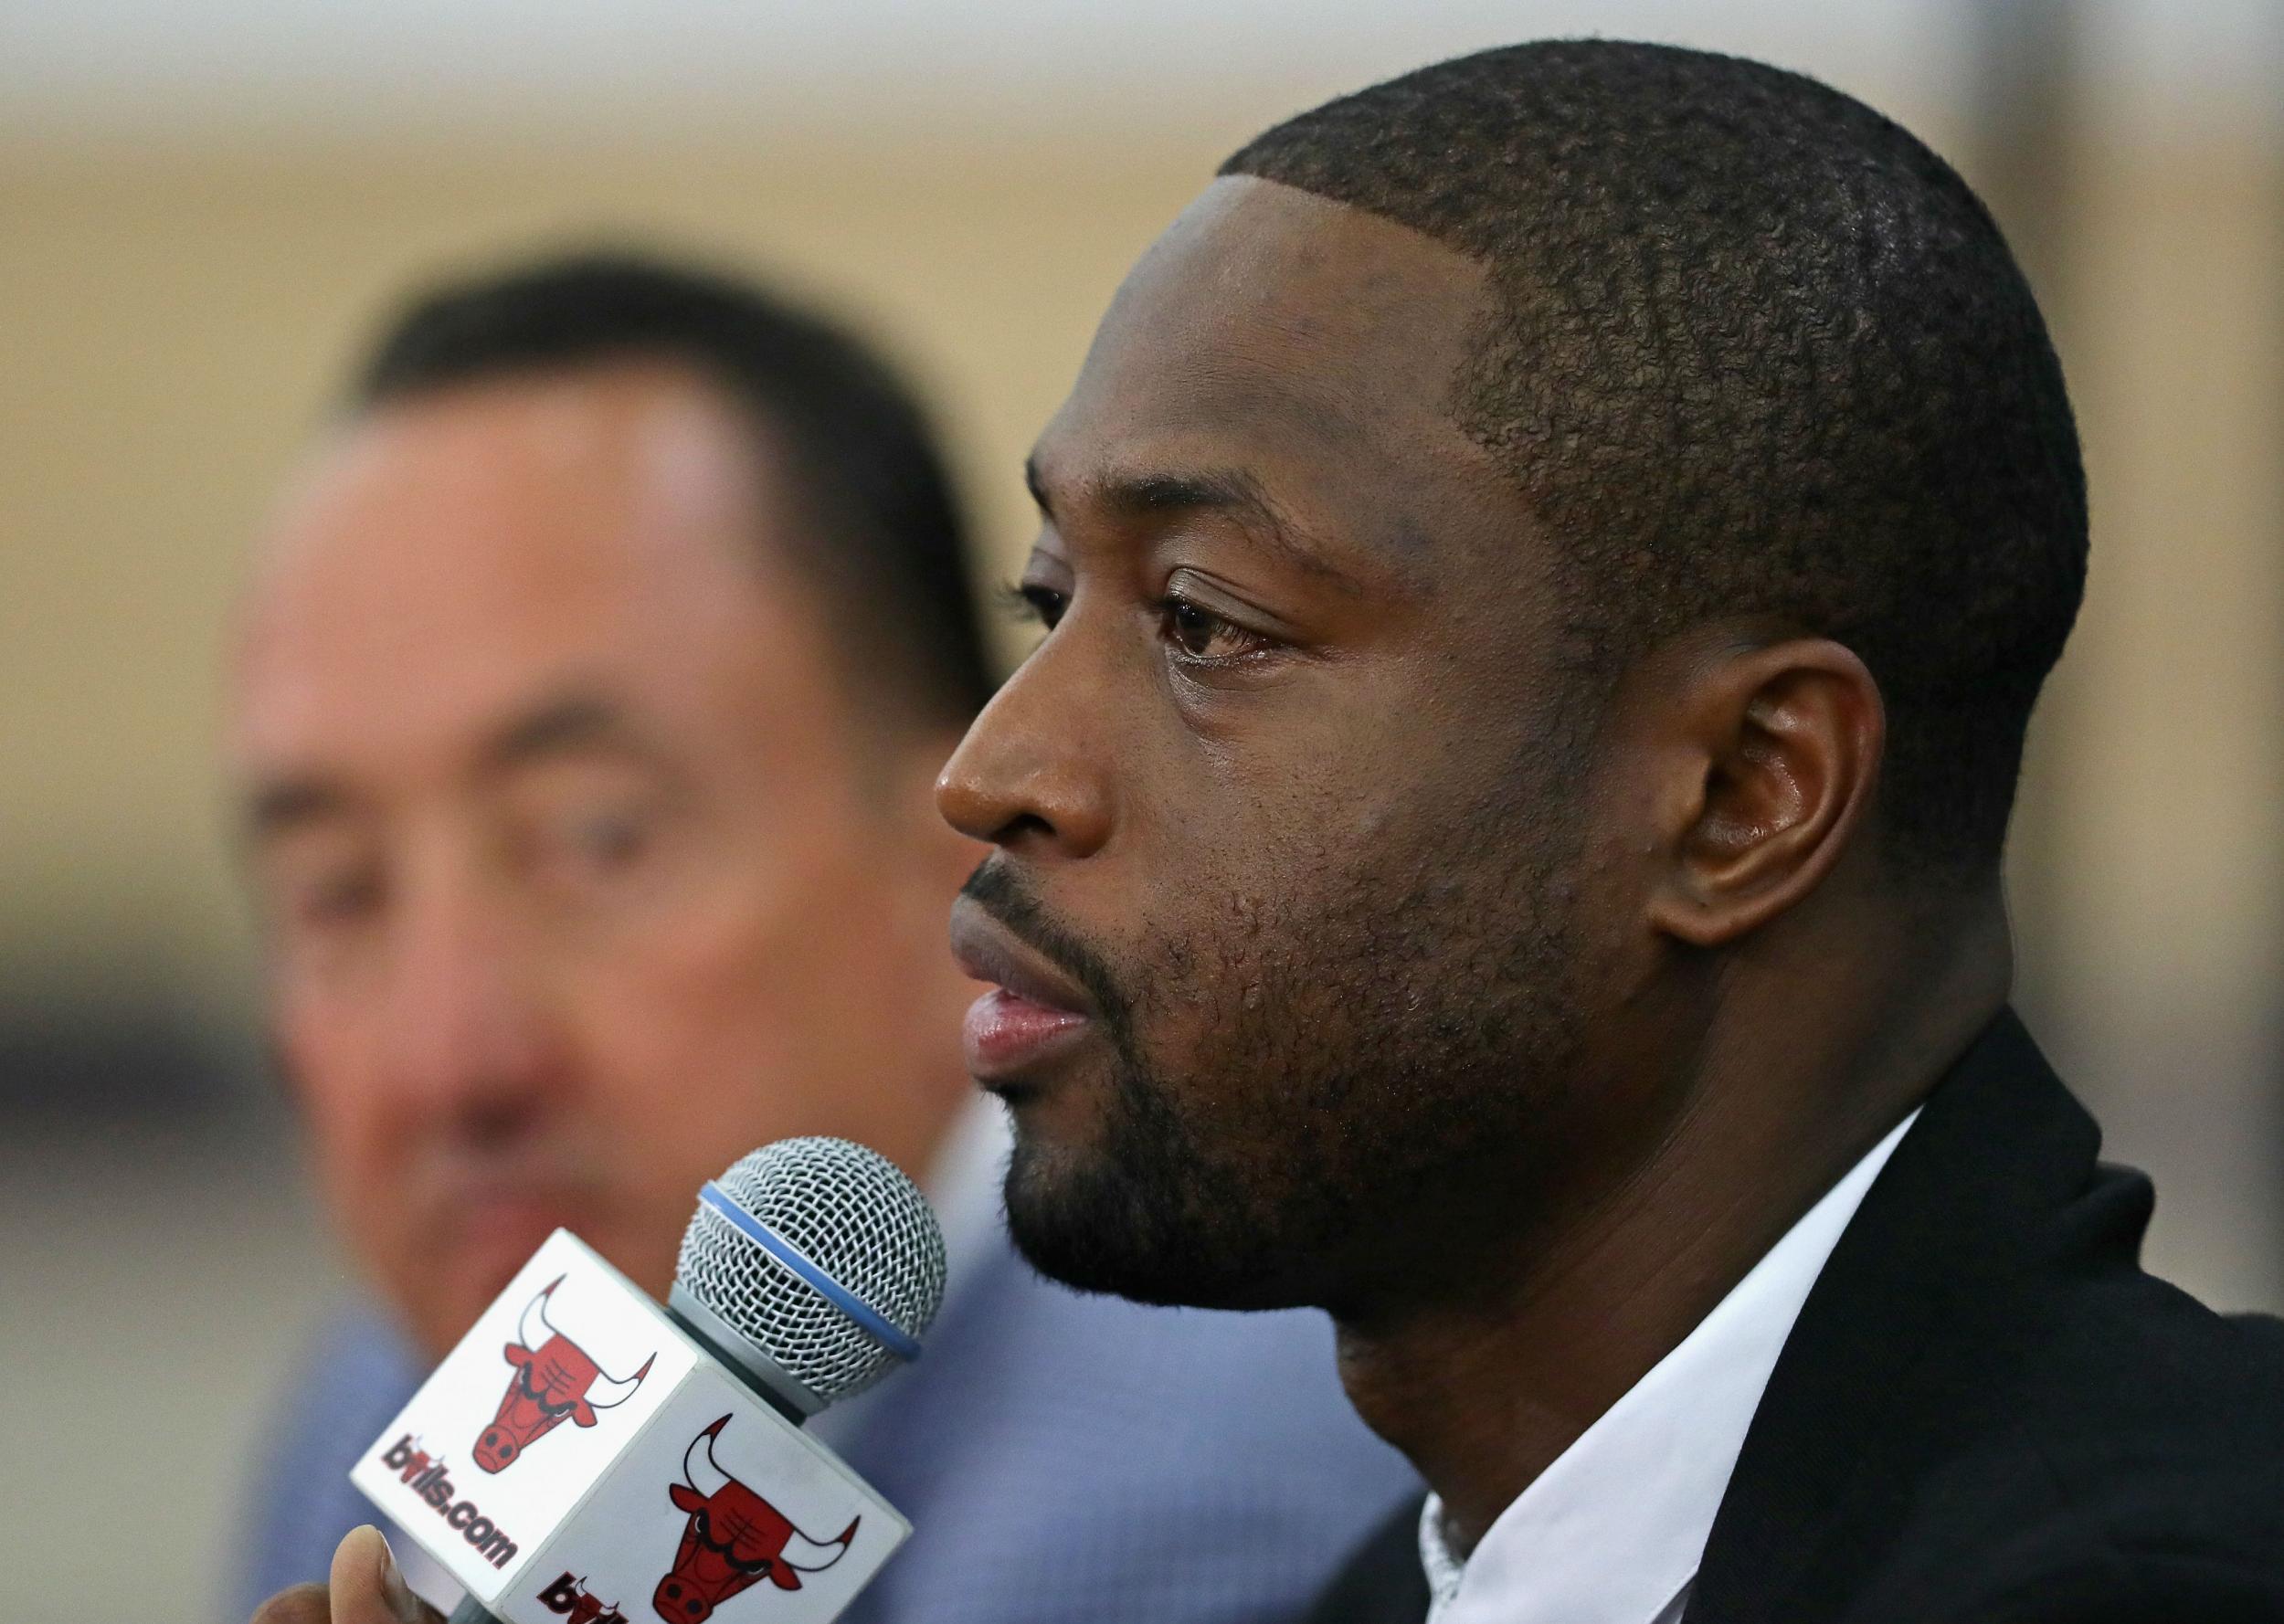 The Bulls introduced Wade in July